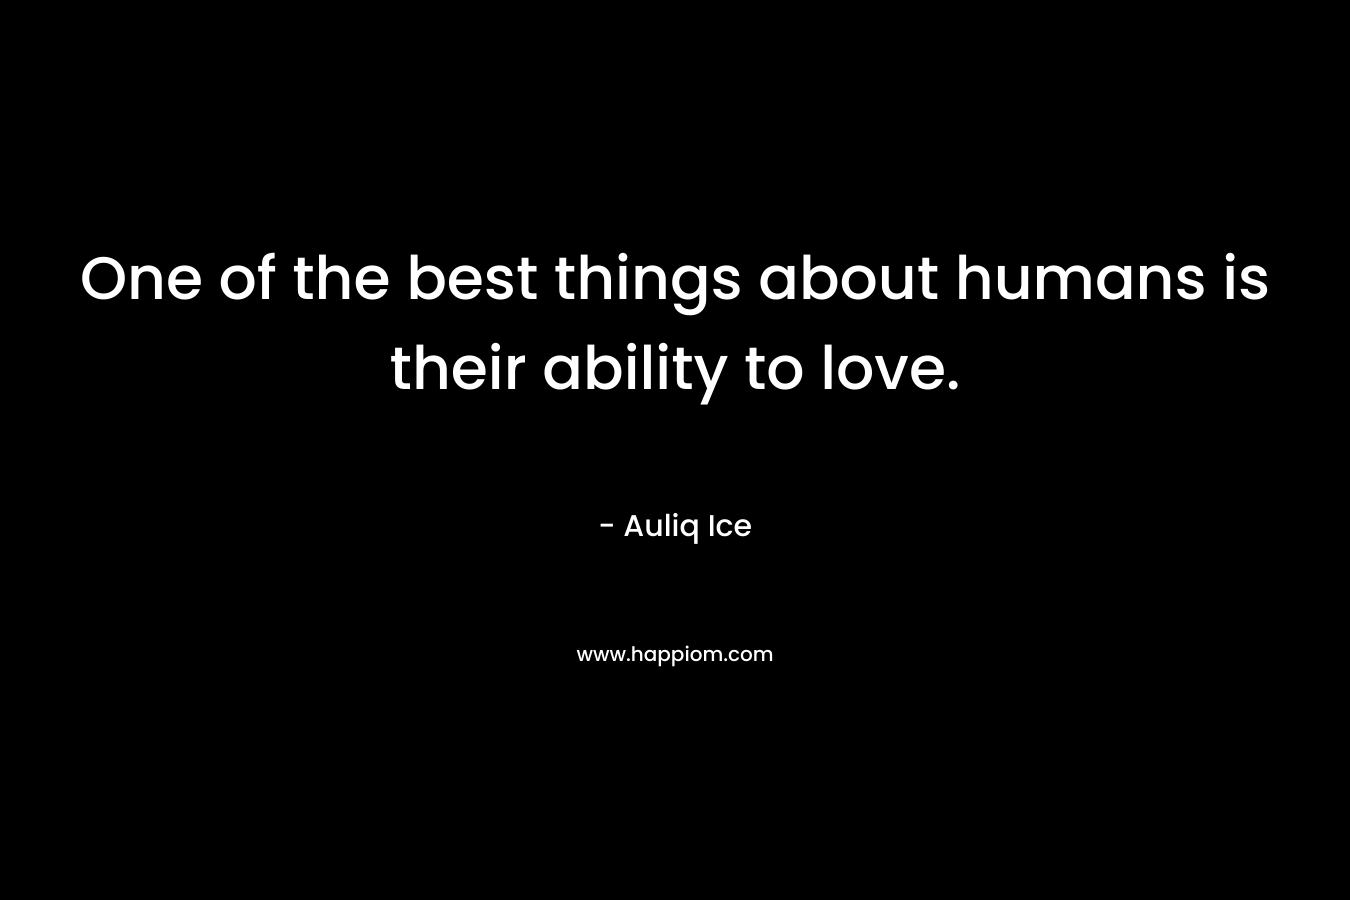 One of the best things about humans is their ability to love.